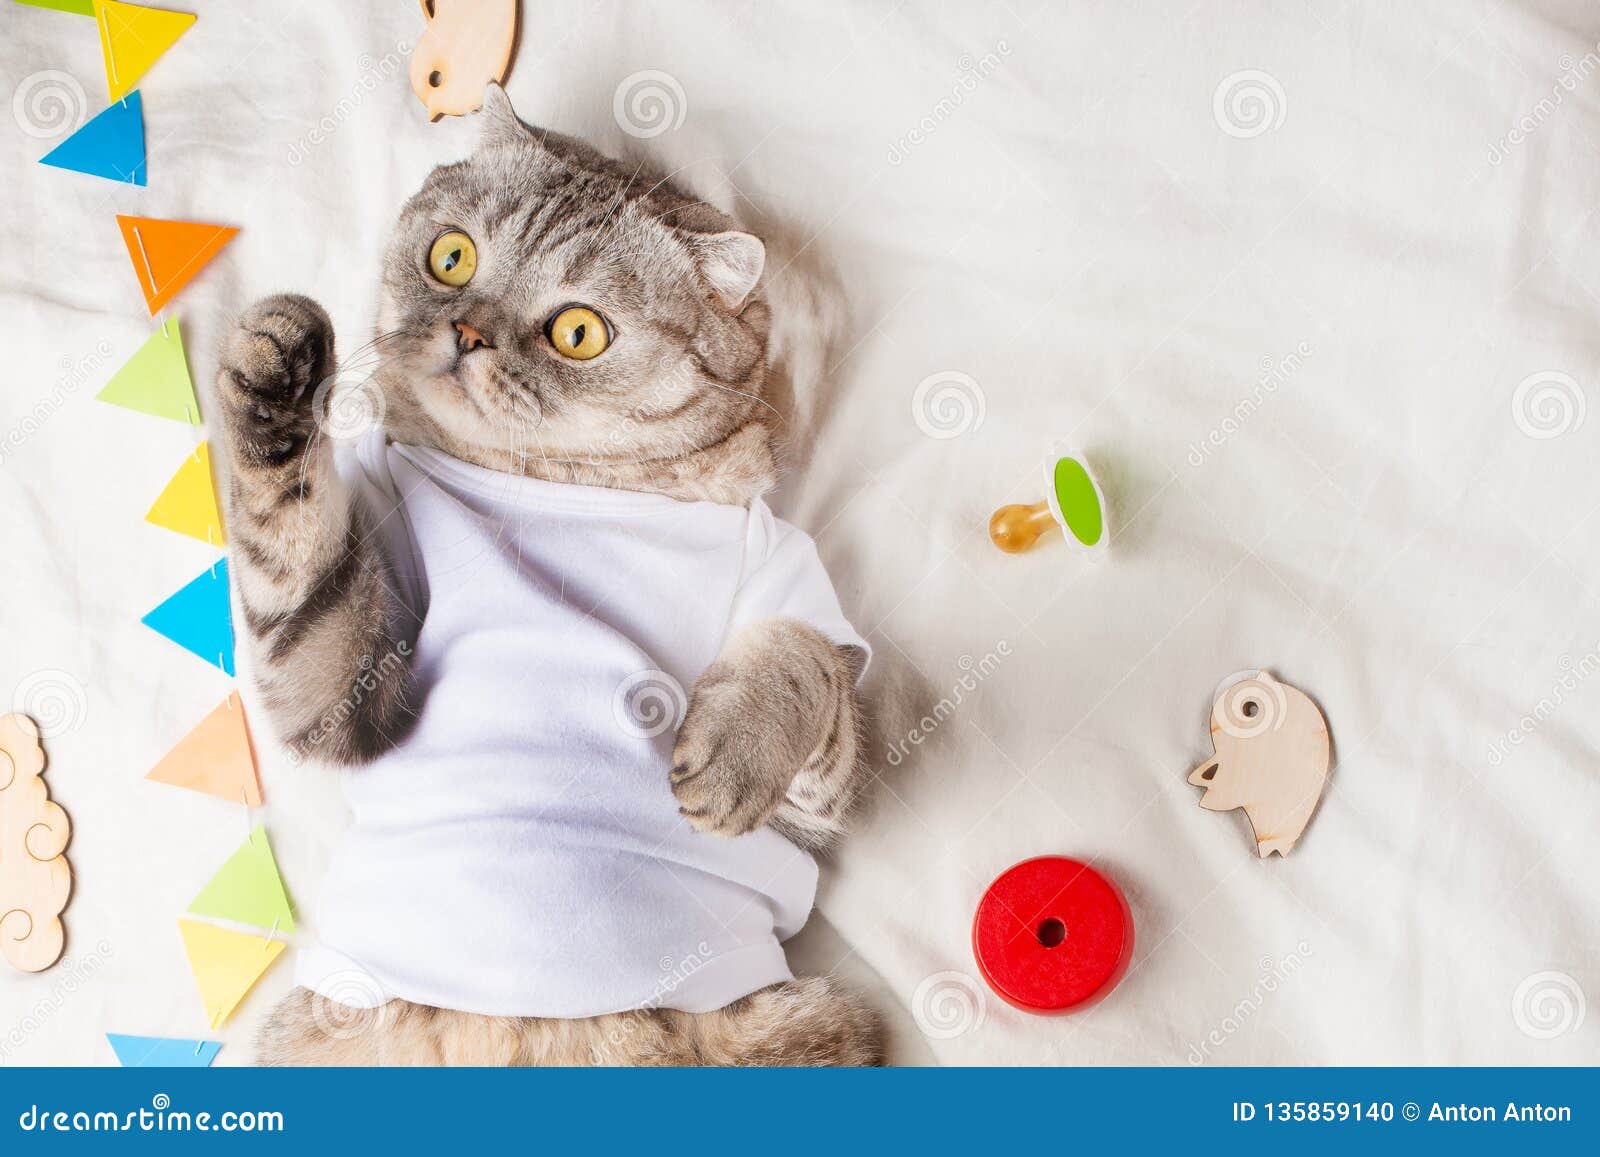 Very Cute Baby Cat, with Toys and a Pacifier. in a White T-shirt ...